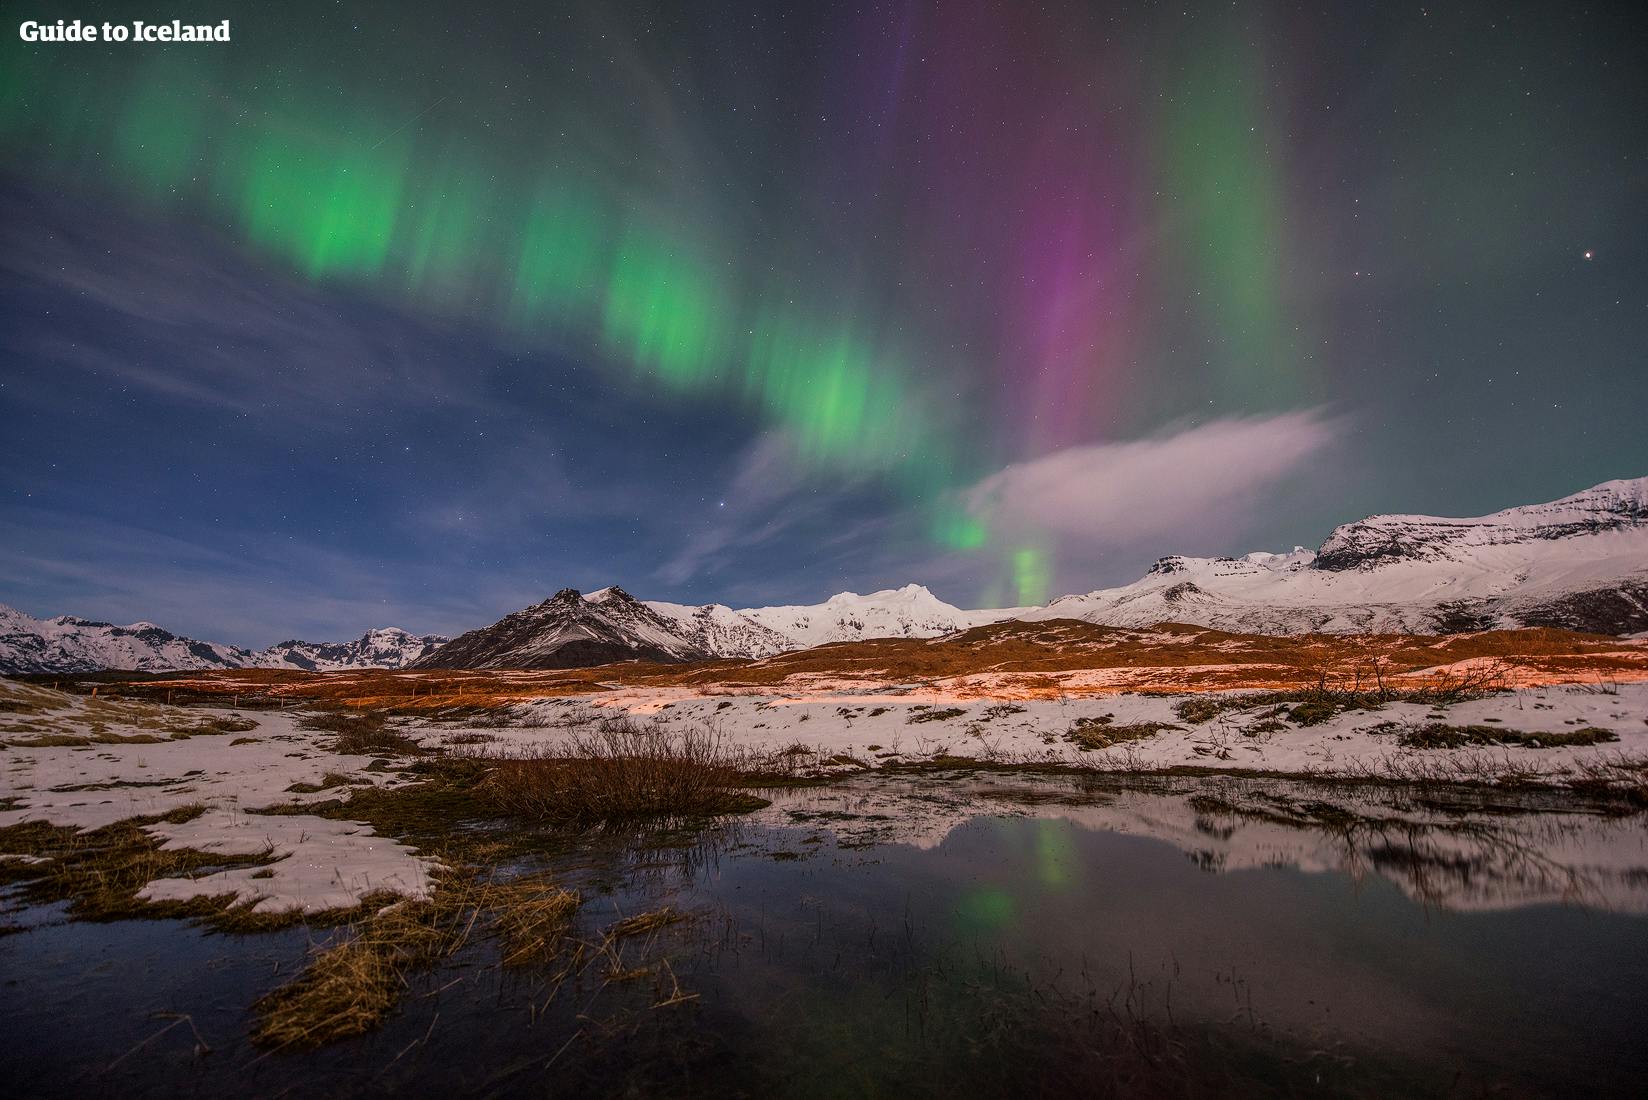 The northern lights dancing in the sky above Iceland in winter.